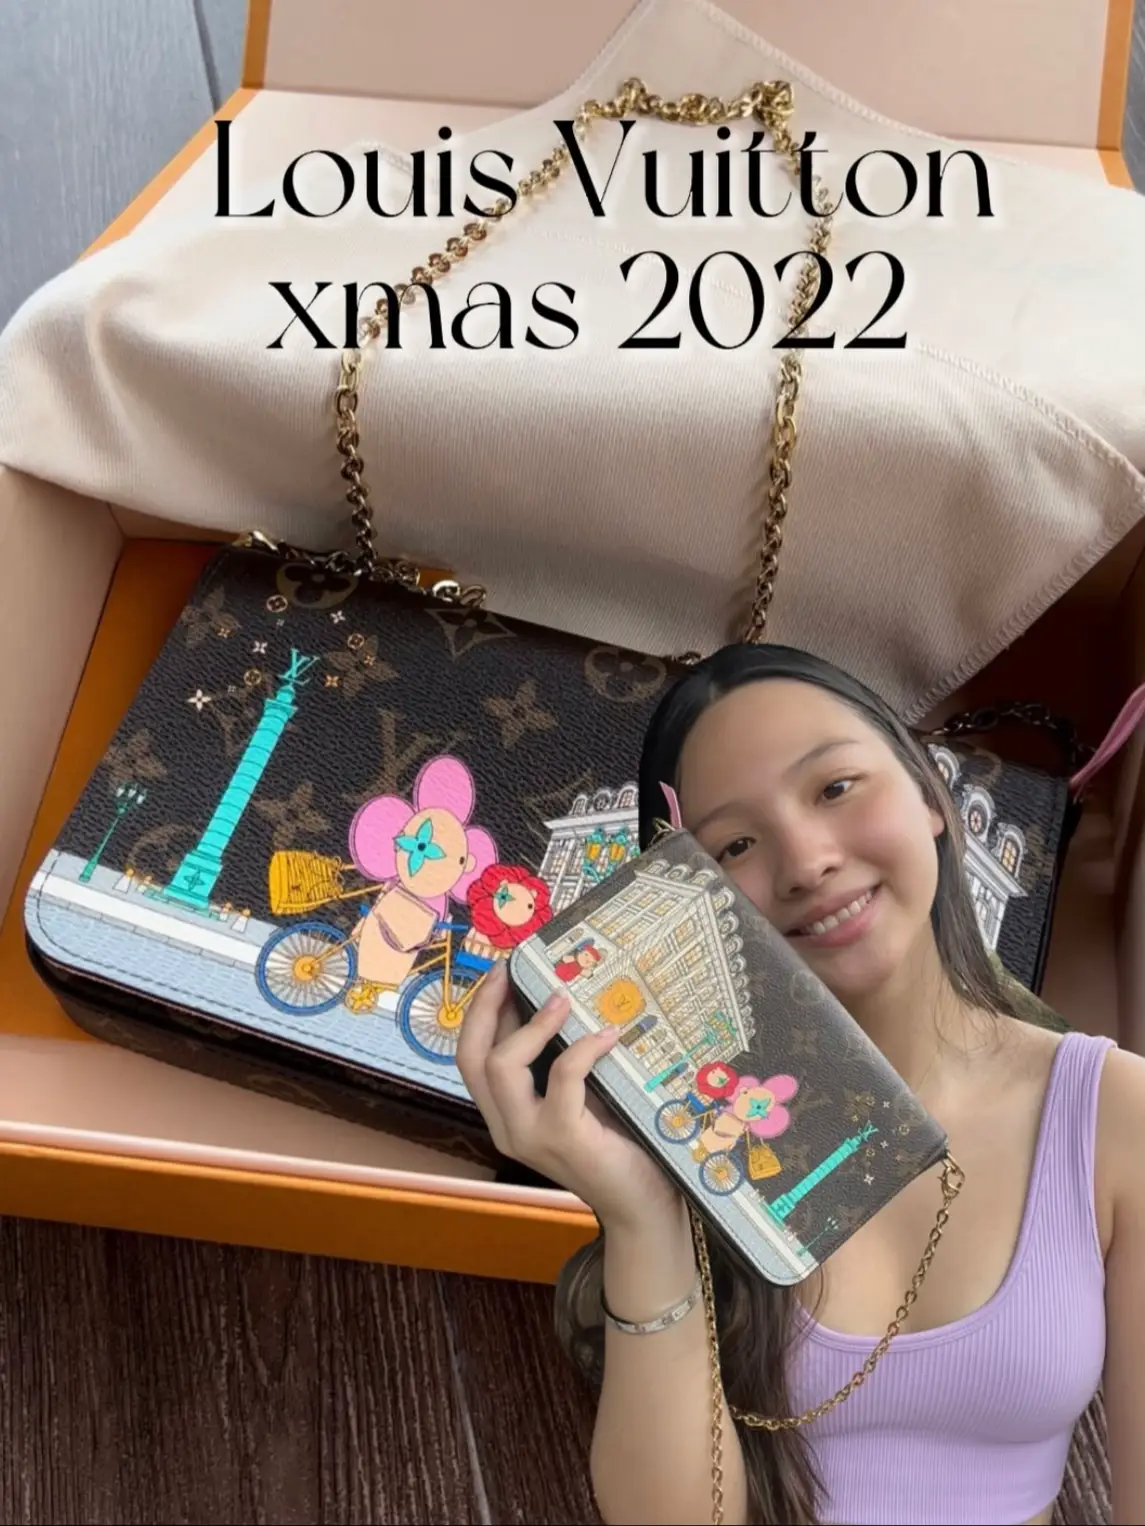 🎄 unbox LV's xmas bag with me!, Video published by gisele rei!